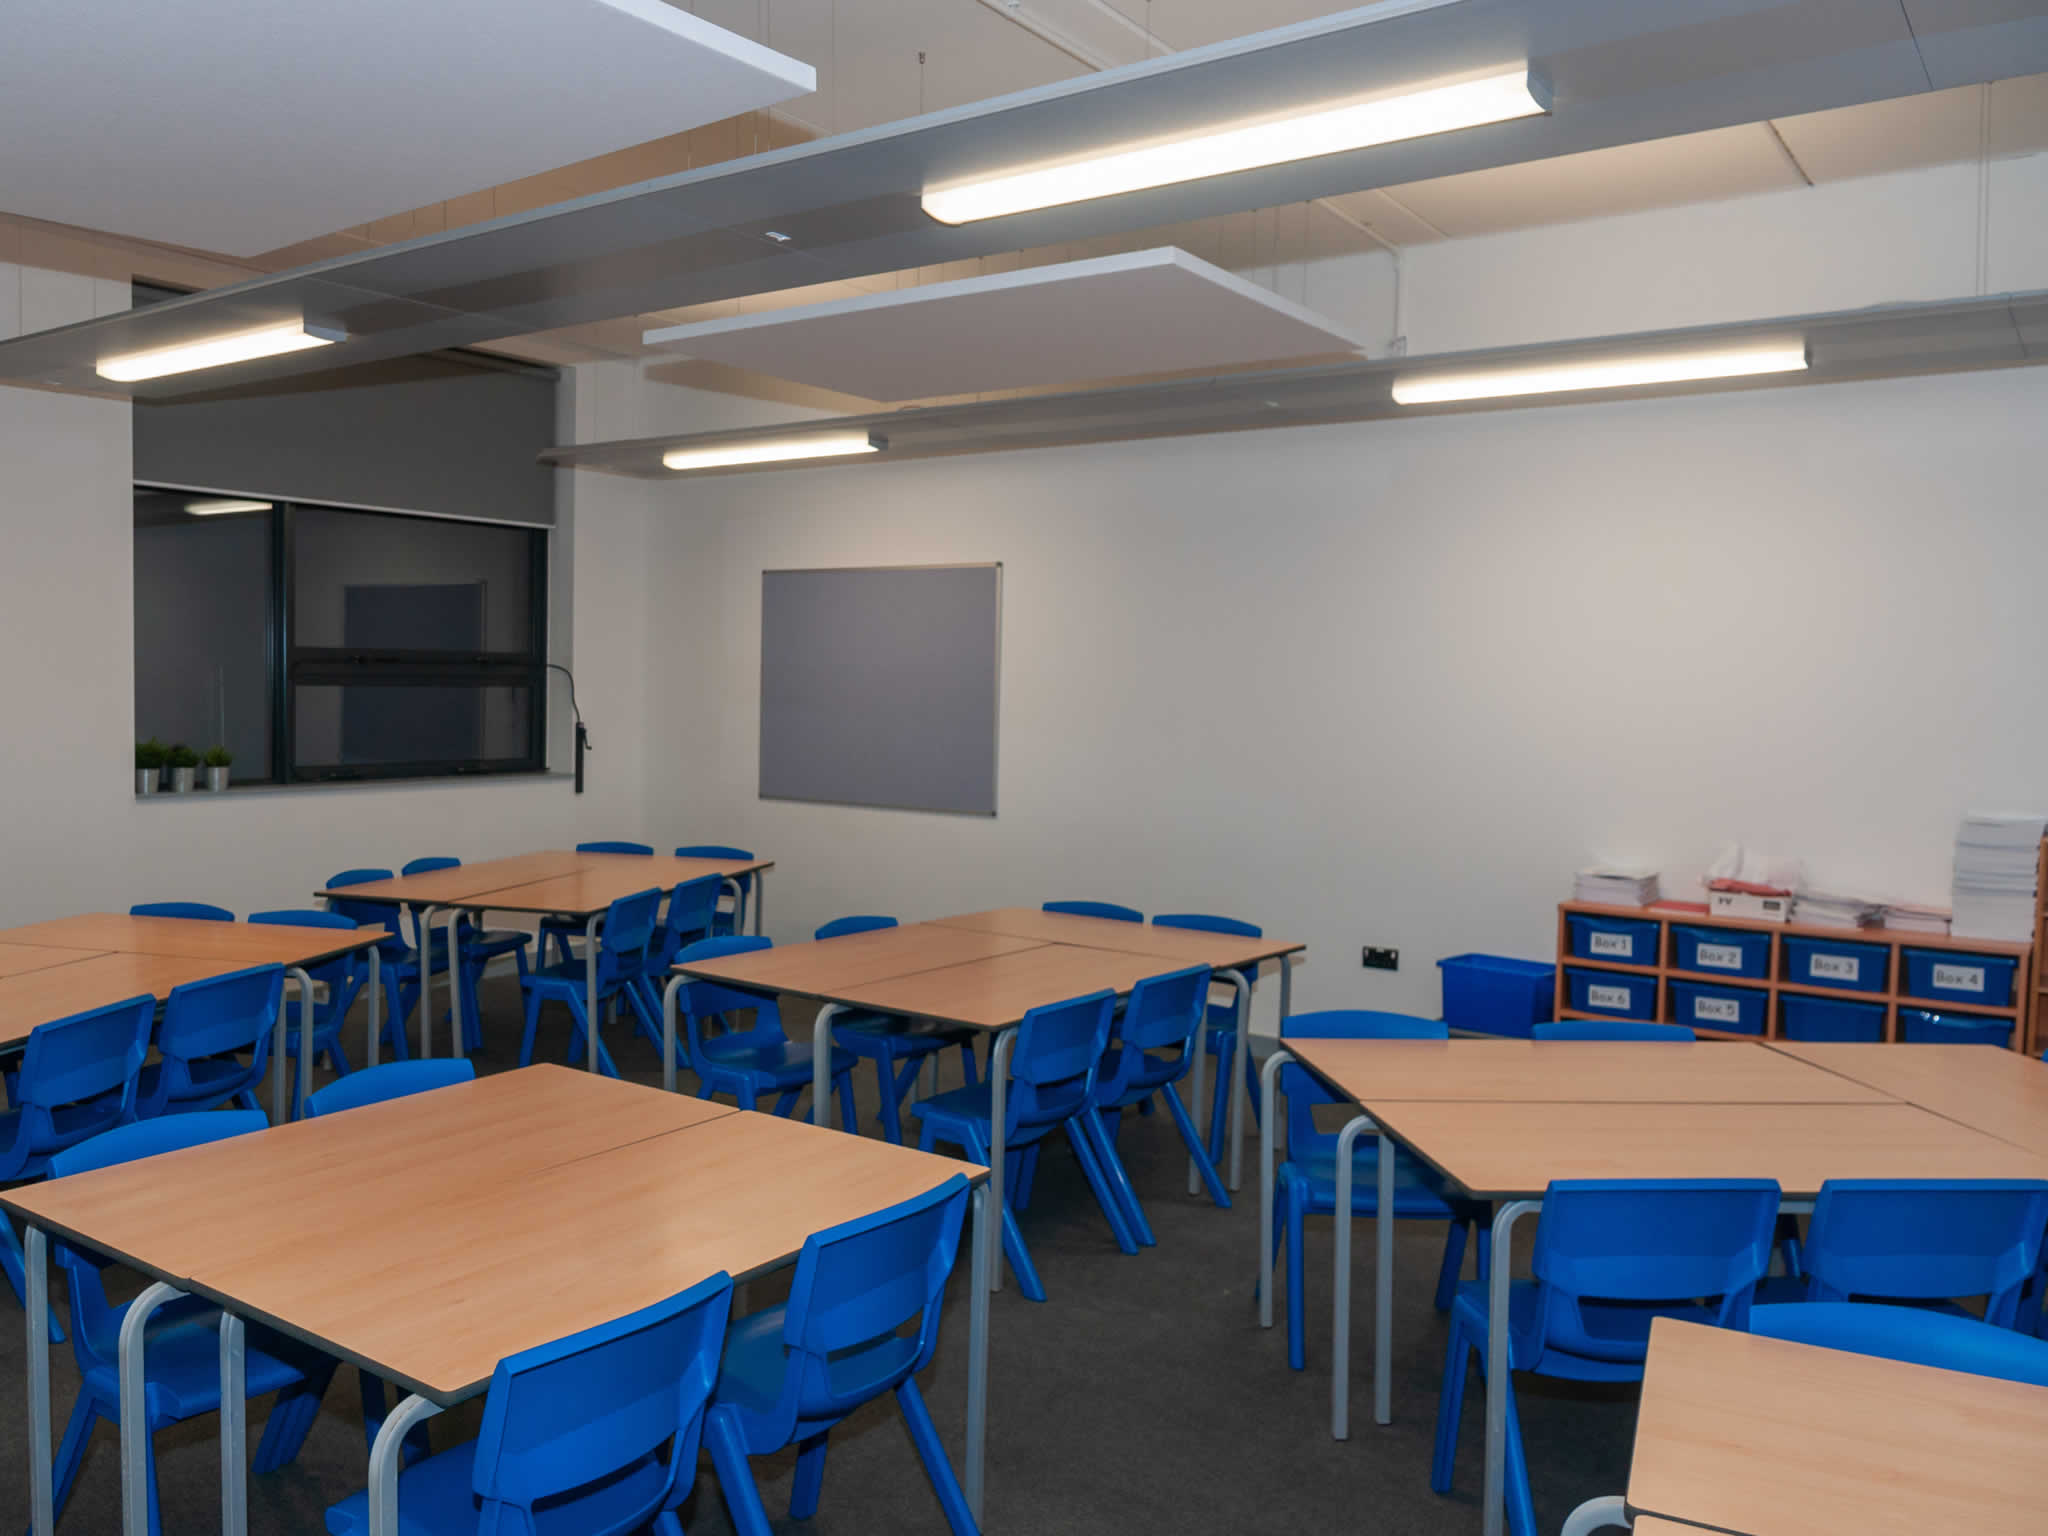 one of the classrooms will be used as a workshop space